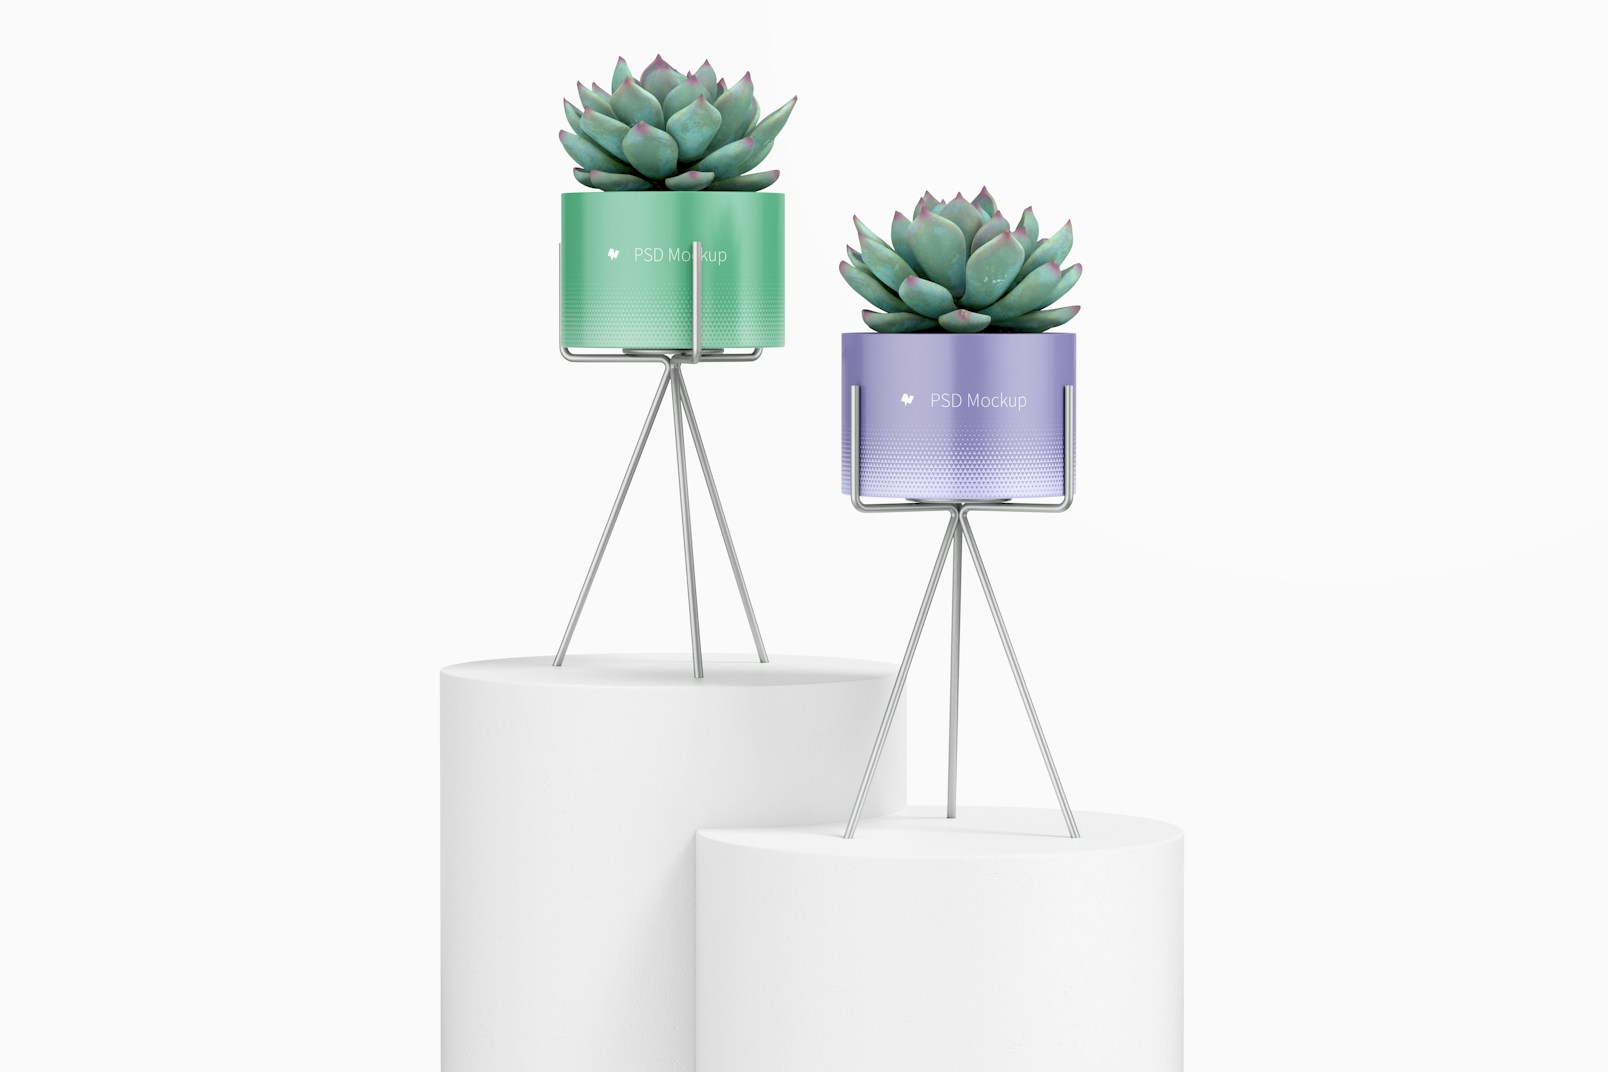 Small Flower Pots with Metal Stands Mockup